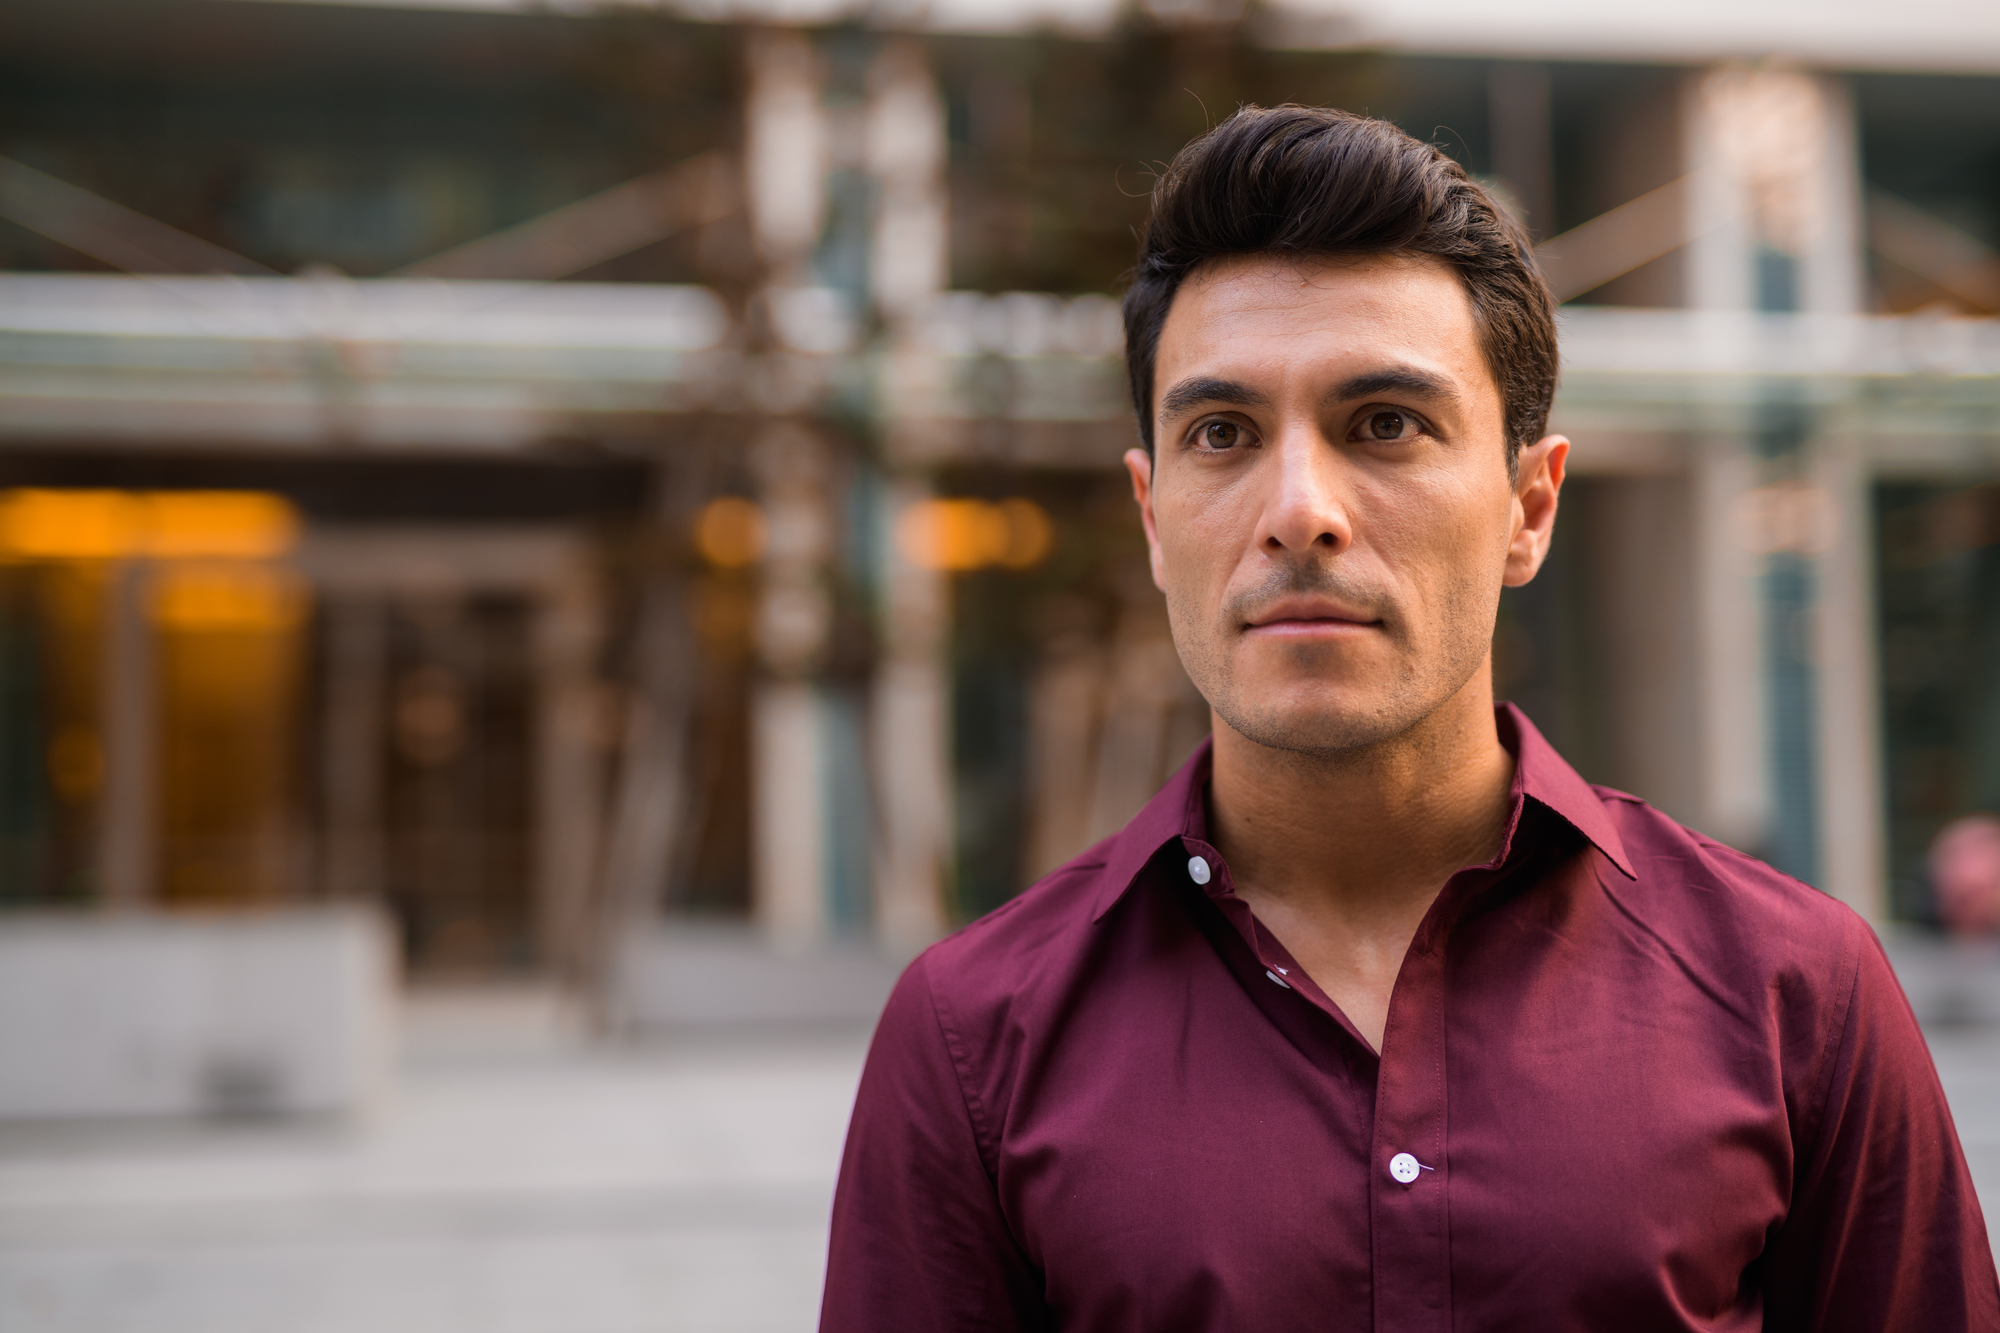 A man with short black hair wearing a maroon button-up shirt stands outside a modern building. He looks into the camera with a neutral expression. The background is blurred, highlighting the architectural elements and greenery behind him.